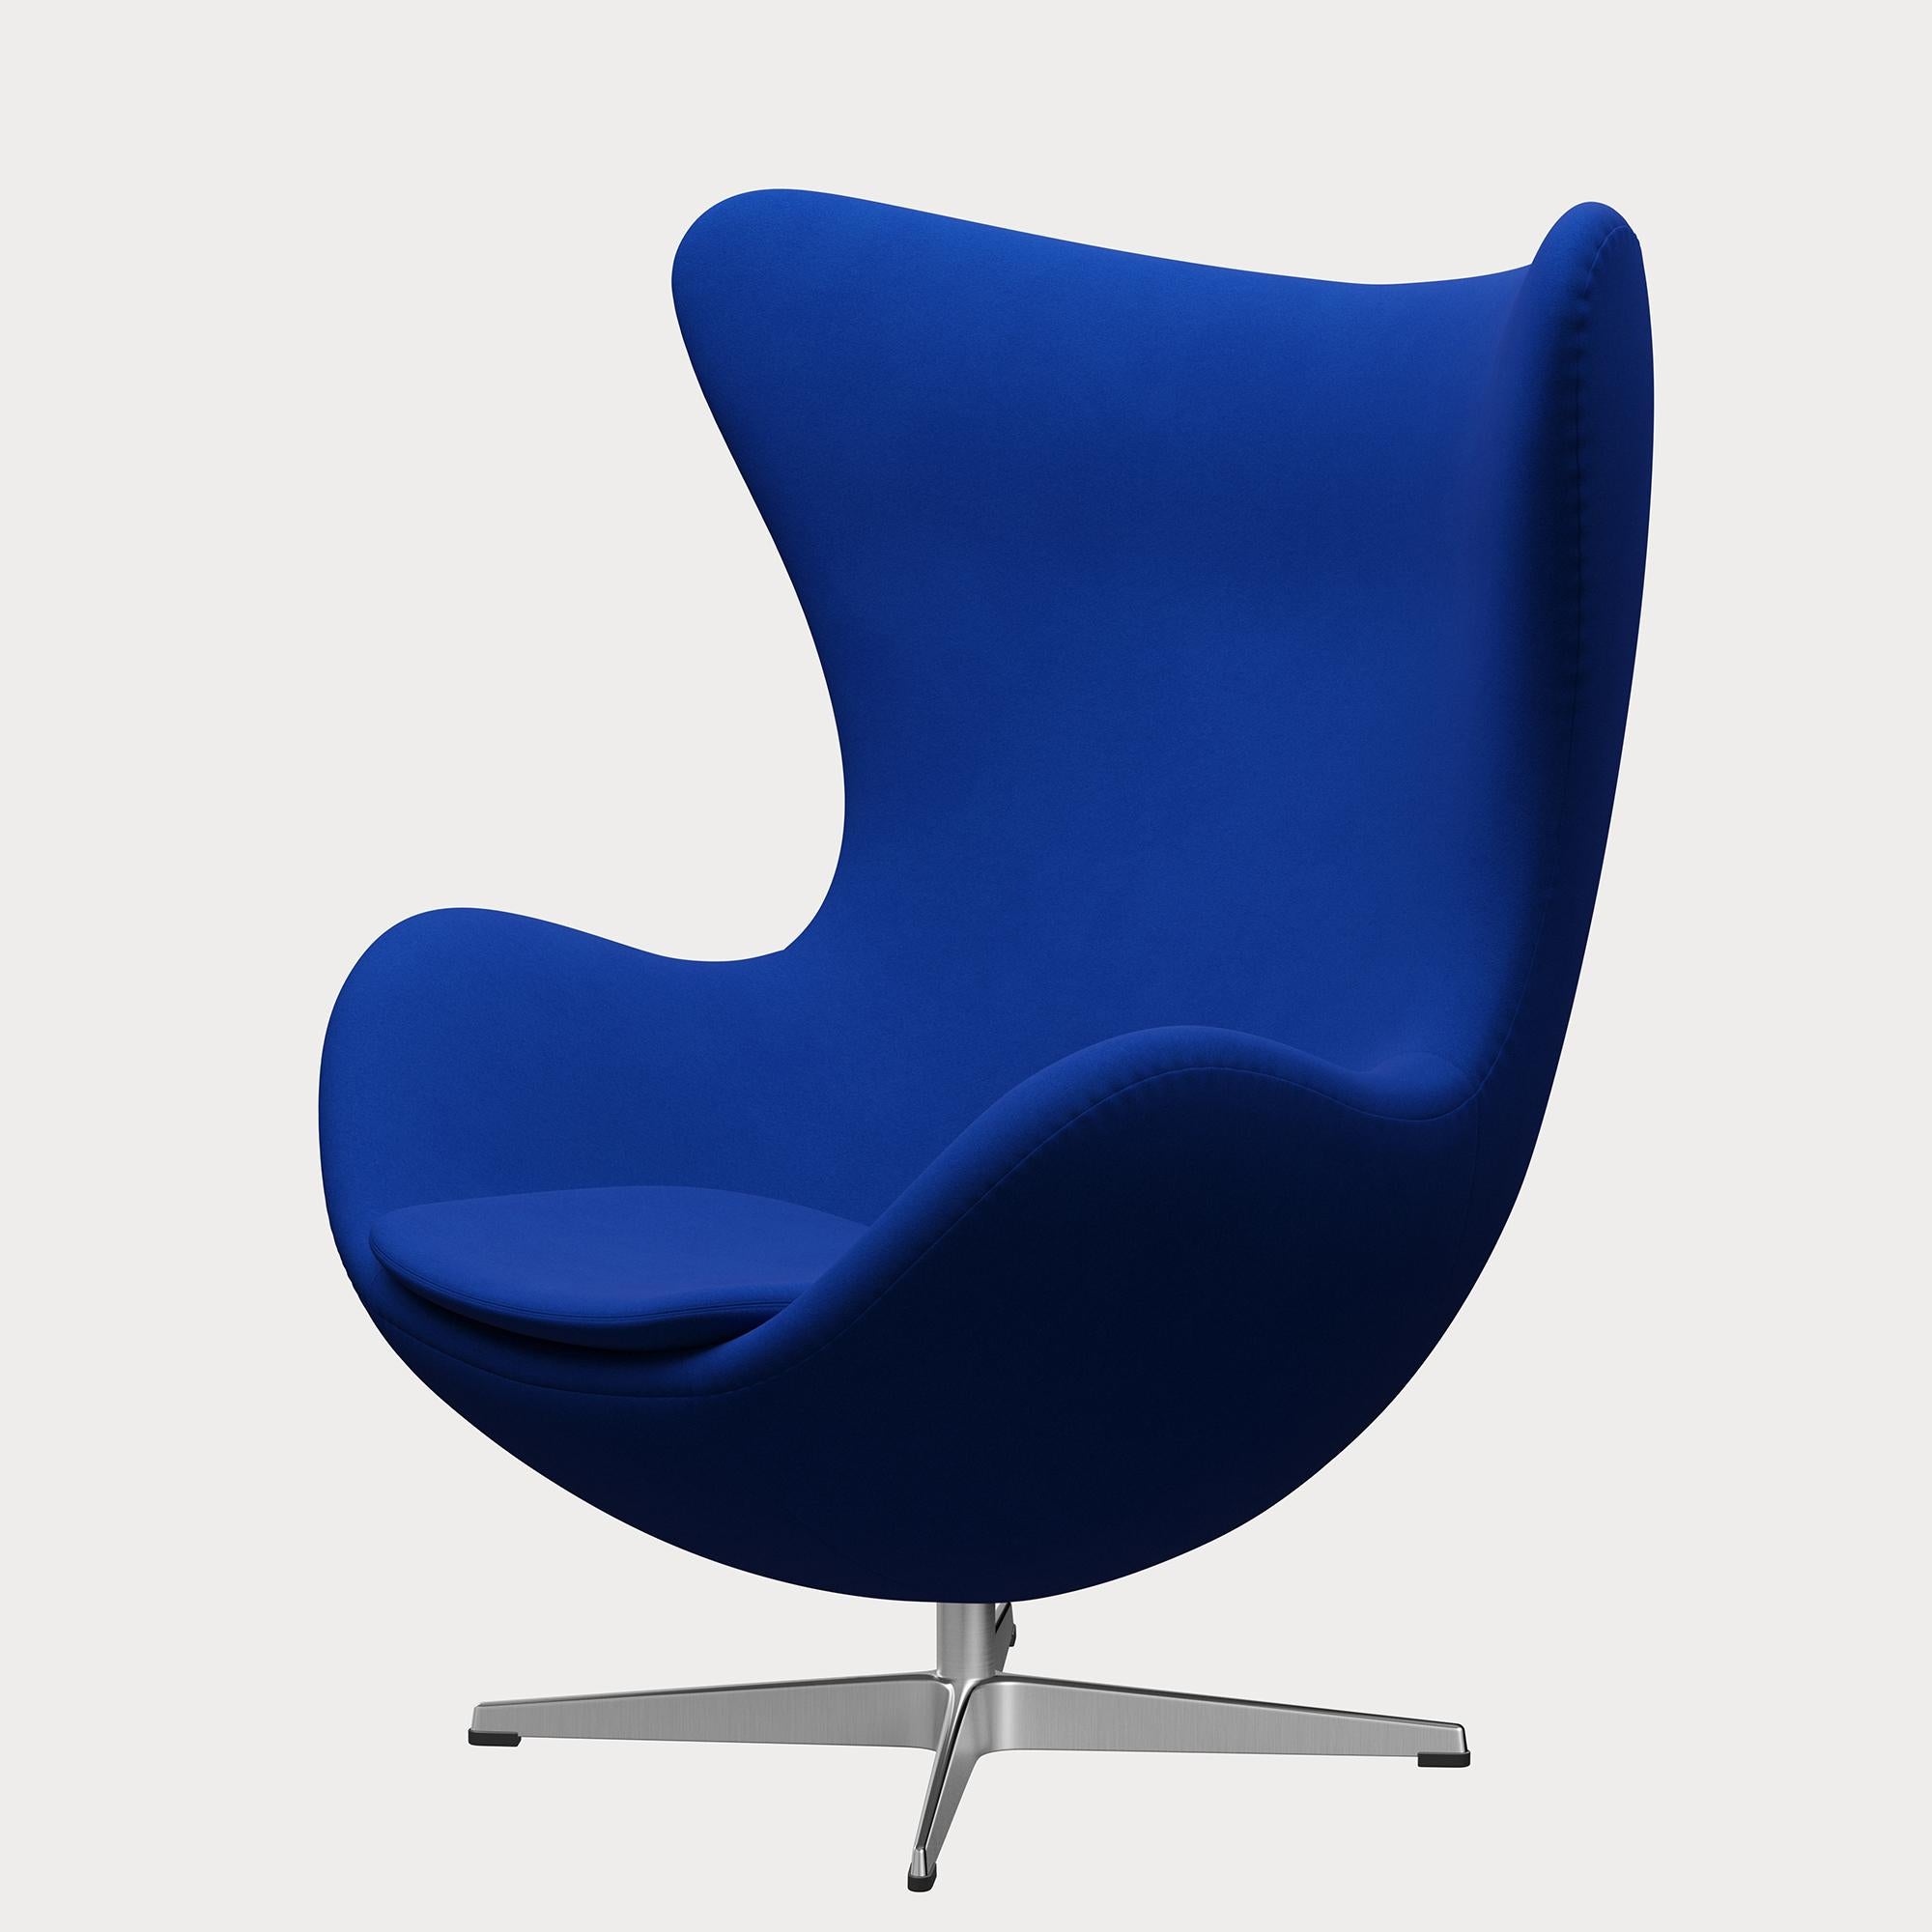 Arne Jacobsen 'Egg' Chair for Fritz Hansen in Fabric Upholstery (Cat. 3) In New Condition For Sale In Glendale, CA